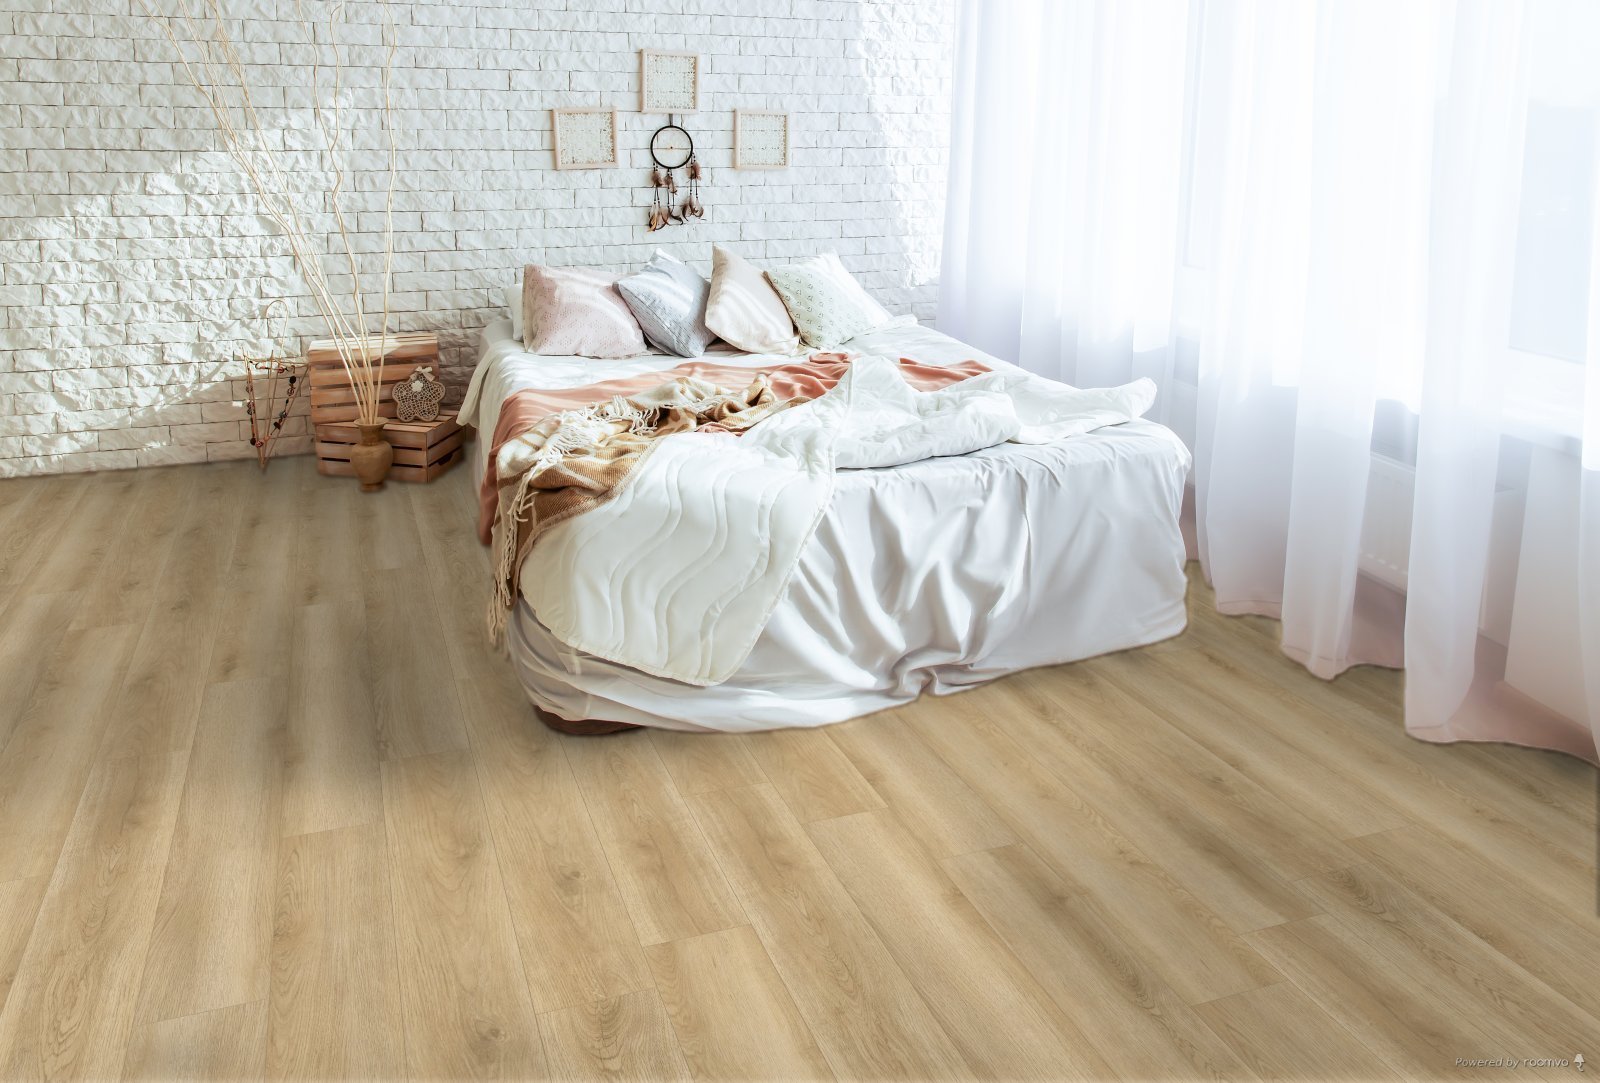 Horizen Flooring presents to you a picture of a quality wide plank Rossini luxury vinyl plank. NovoCore Q XXL Tango collection features a wide range of colors & designs that will compliment any interior. Natural wood grain synchronized surface allow for an authentic hardwood look & feel. This collection features a 0.3″ / 7.5 mm overall thickness and a durable 22 mil / 0.55 mm wear layer for residential and commercial applications.